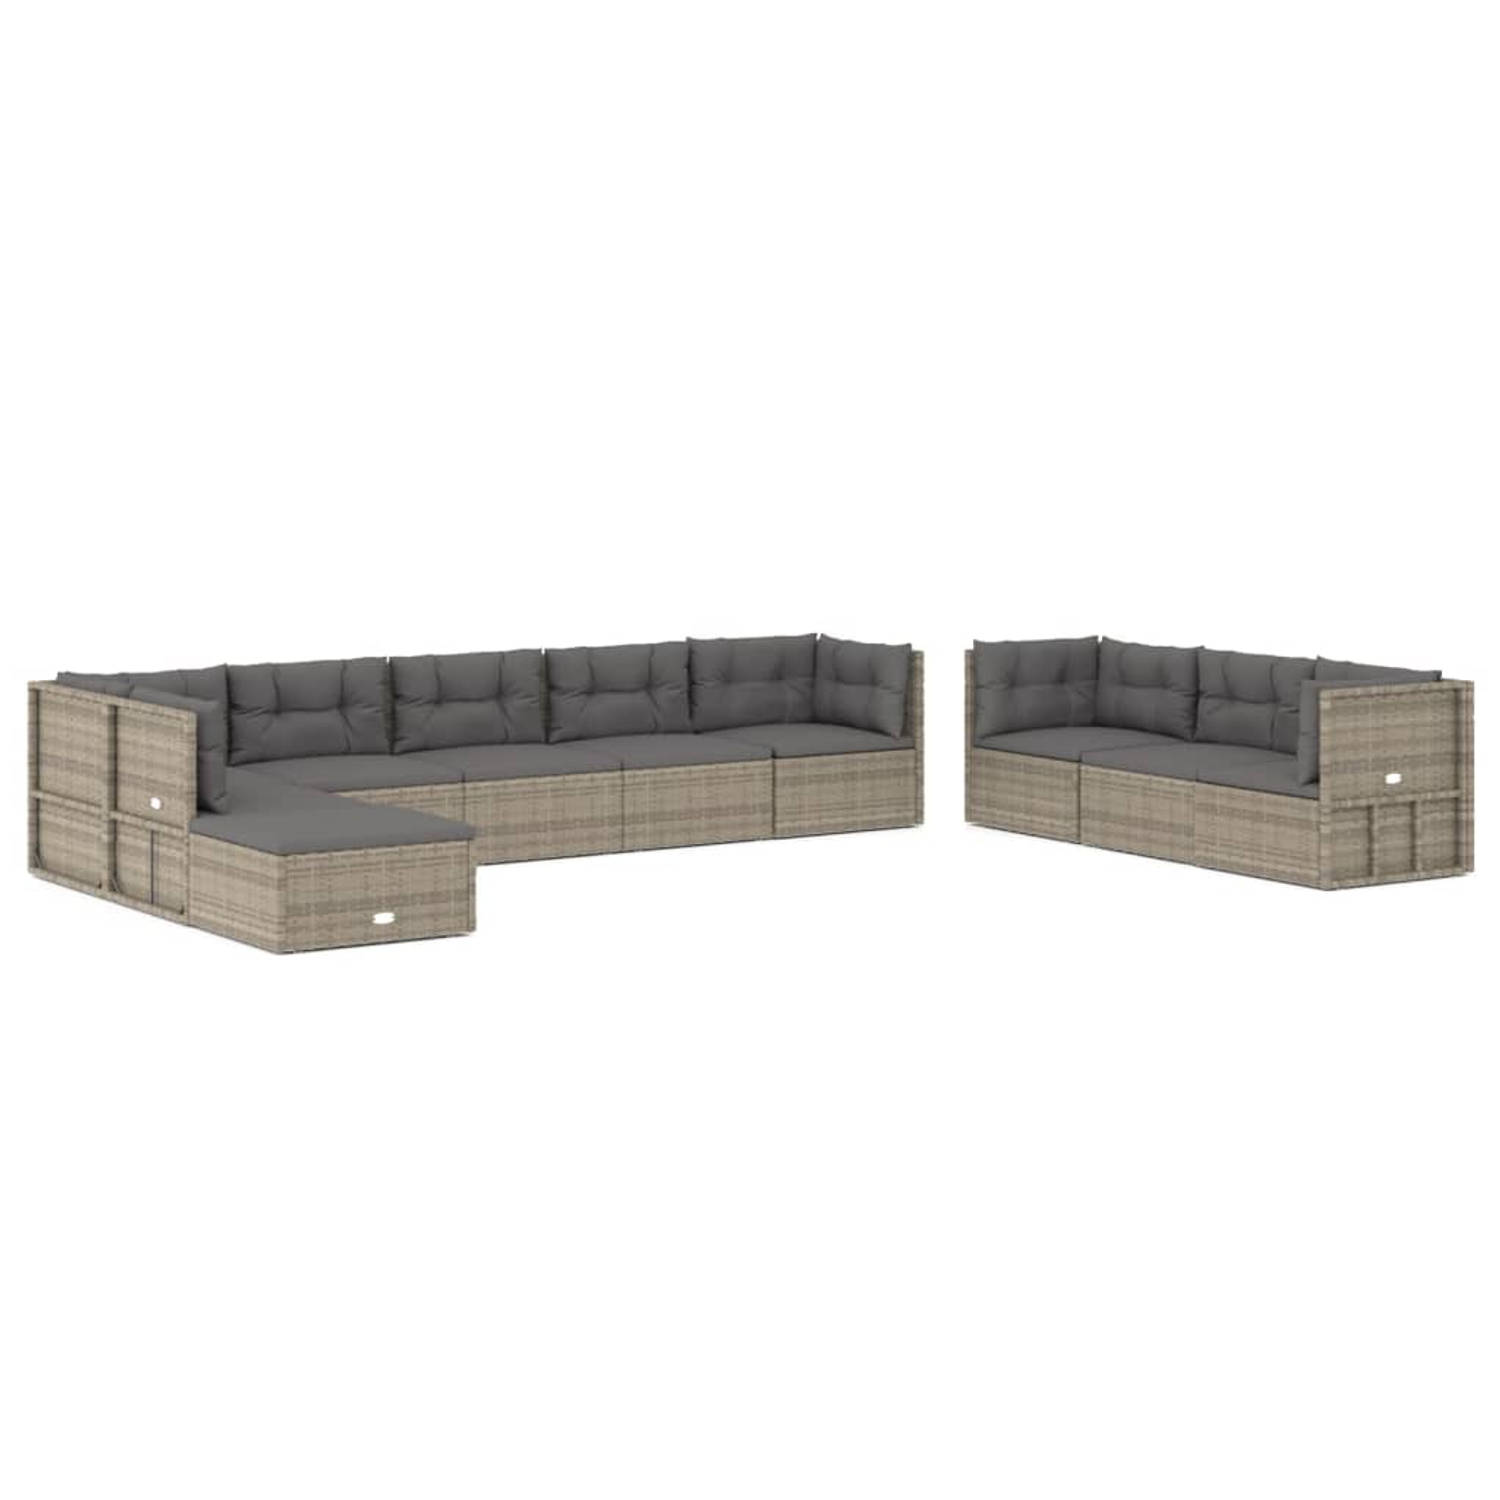 The Living Store Loungeset - Grijs - PE-rattan - Staal - 54x54x24.5/38/50/55 cm - Modulair